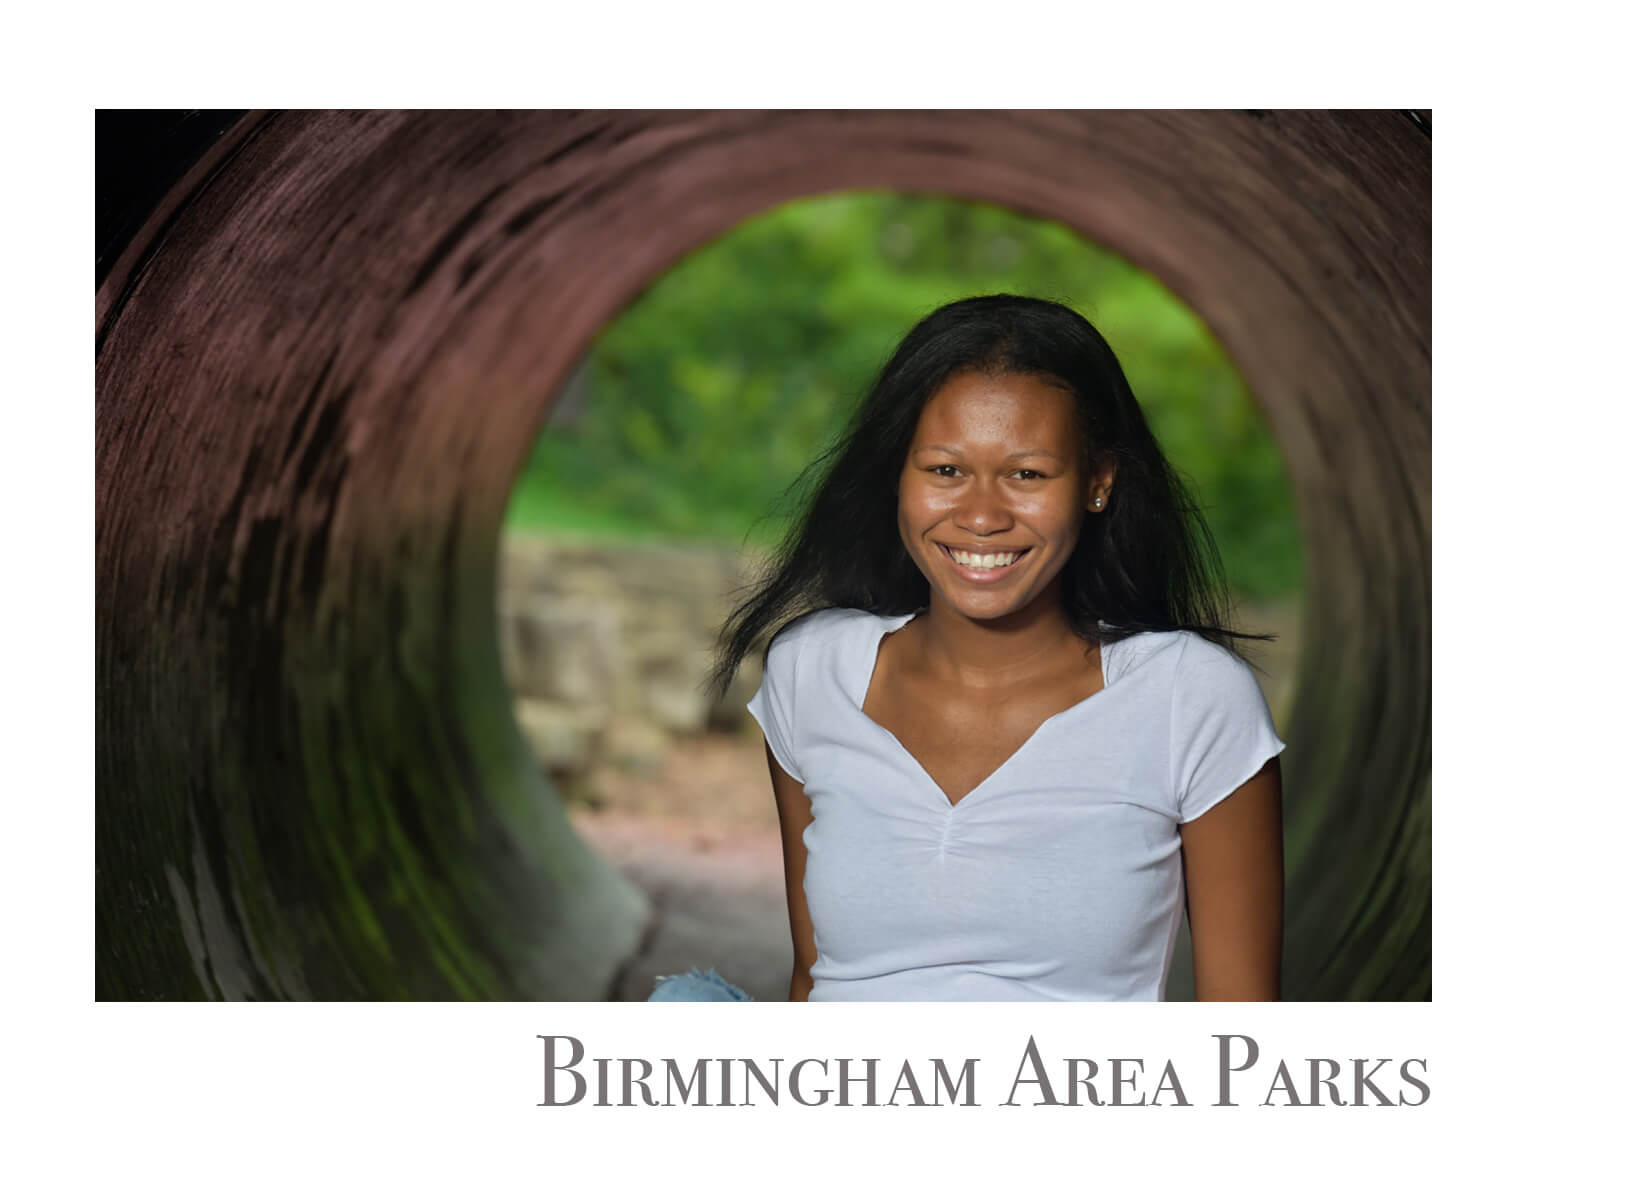 Birmingham, Michigan senior photo locations offer parks, lakes and a touch of an urban feel.